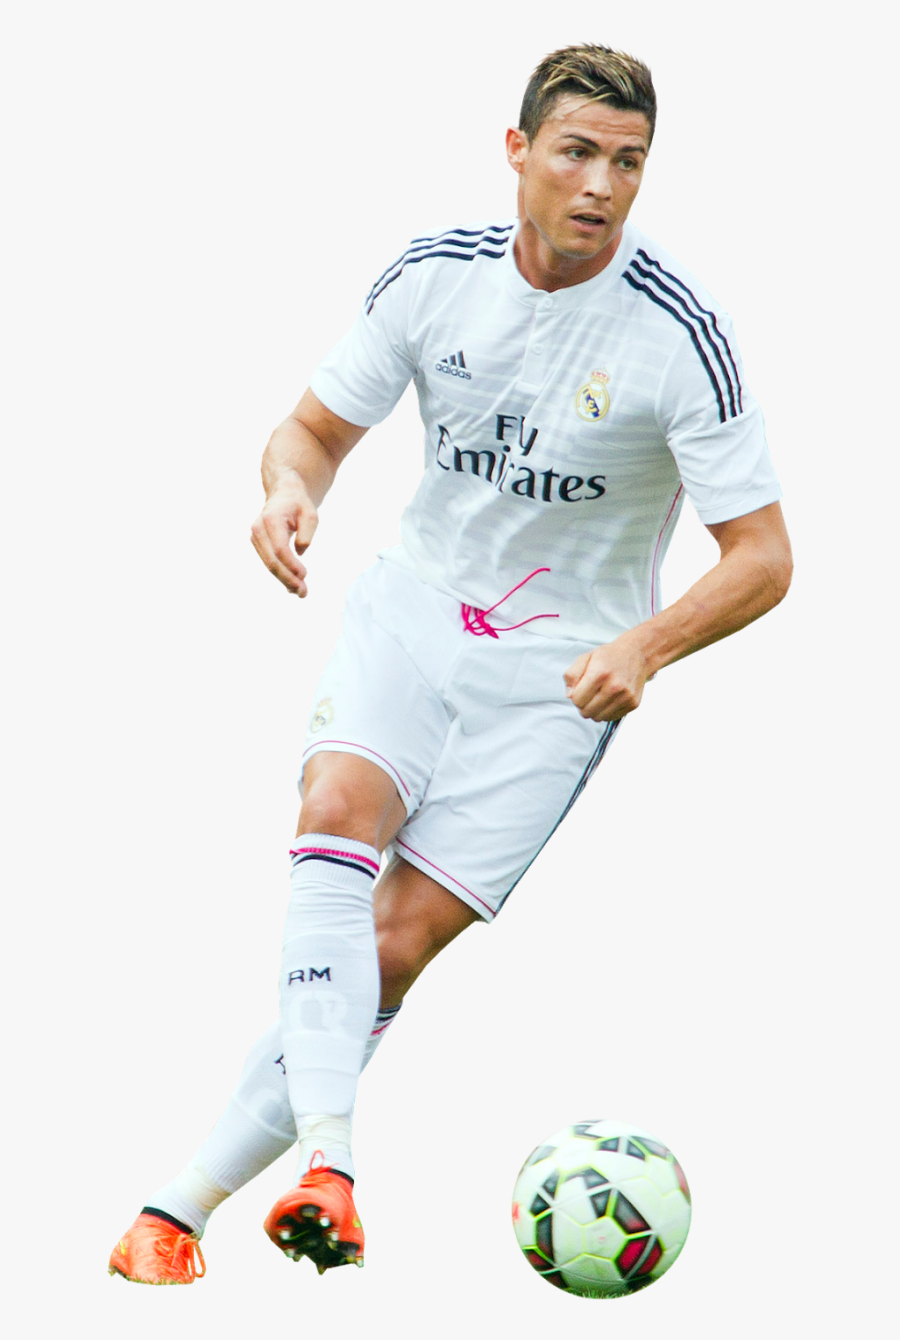 Download Cristiano Ronaldo Png Hd For Designing Projects - Real Madrid Cristiano Ronaldo Png, Transparent Clipart